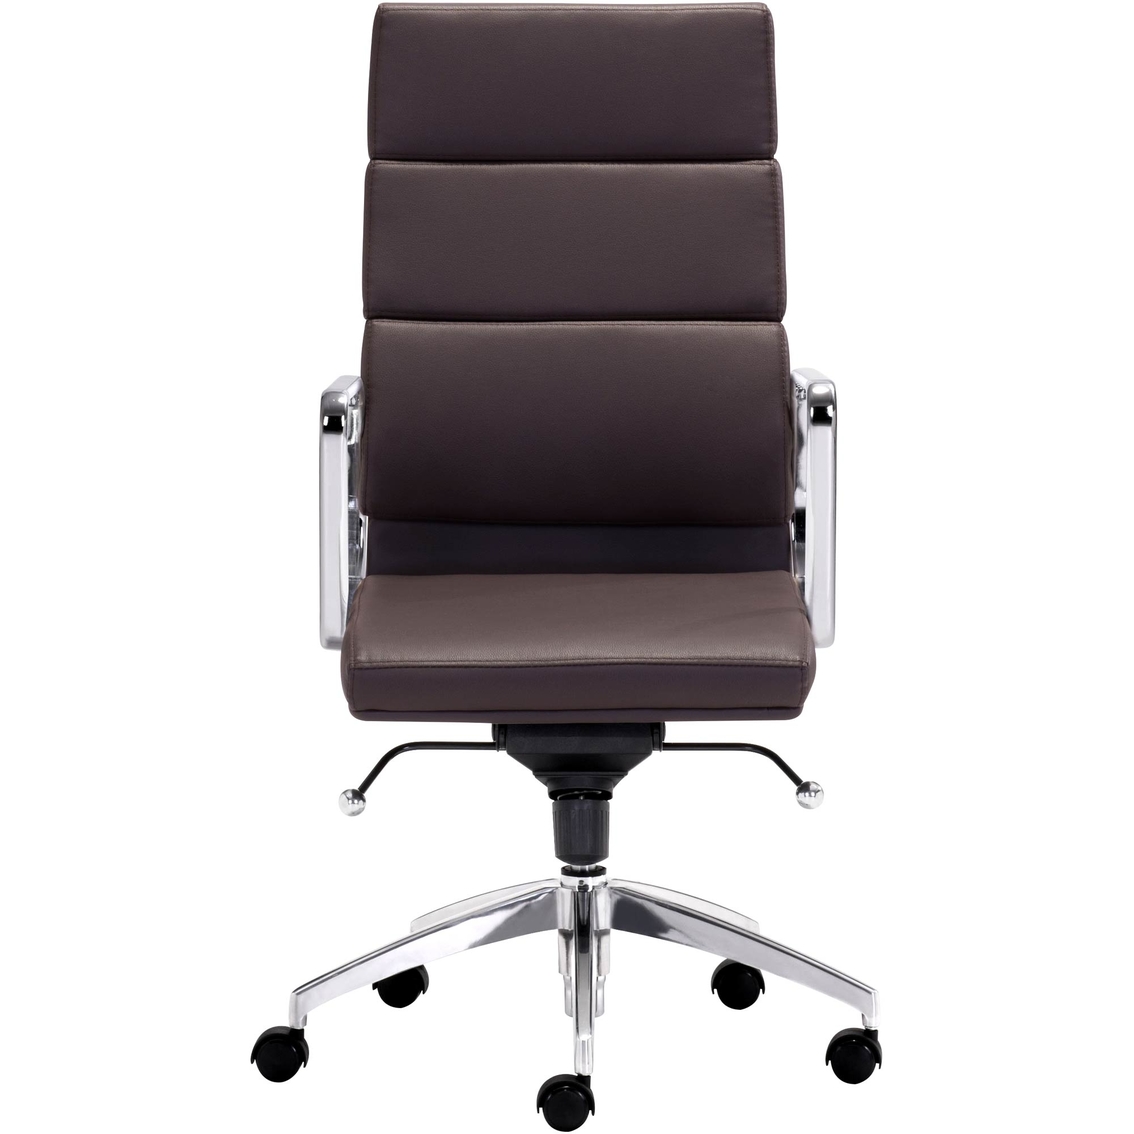 Zuo Modern Engineer High Back Office Chair - Image 2 of 4